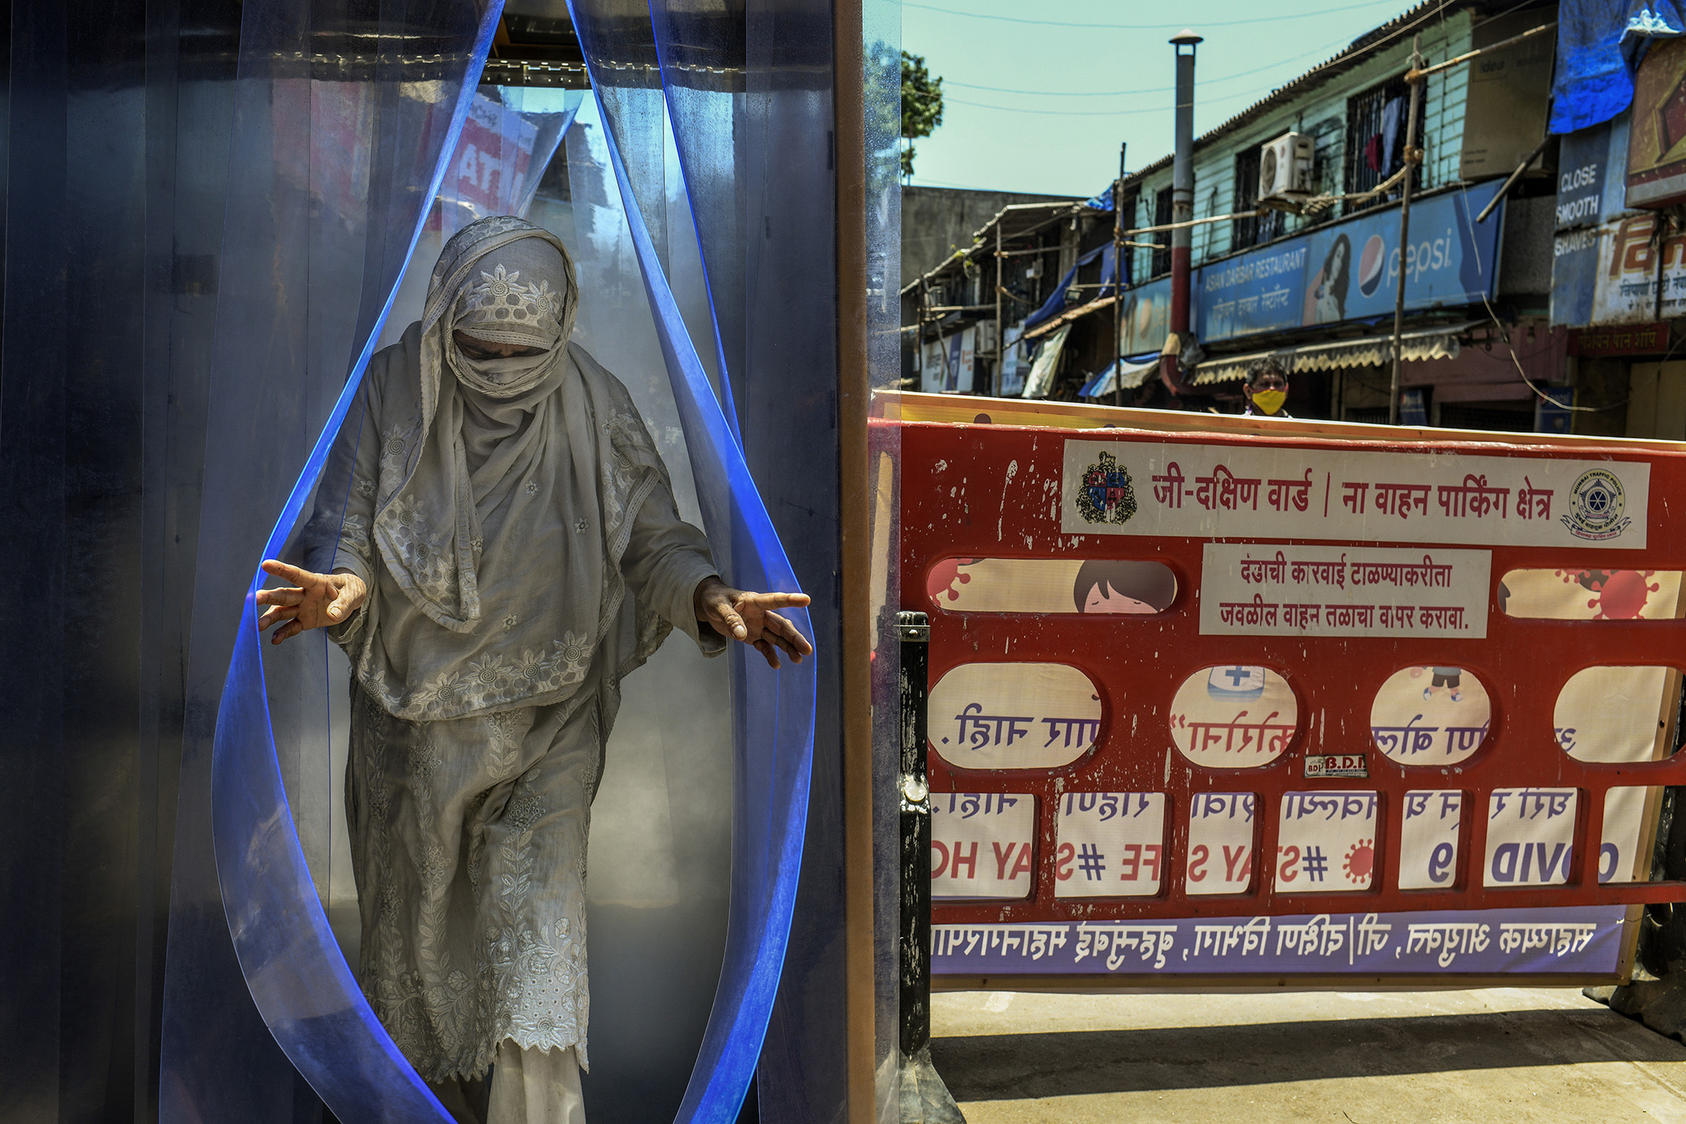 A woman passes through a sanitizing tunnel in Mumbai. April 25, 2020. (Atul Loke/The New York Times)